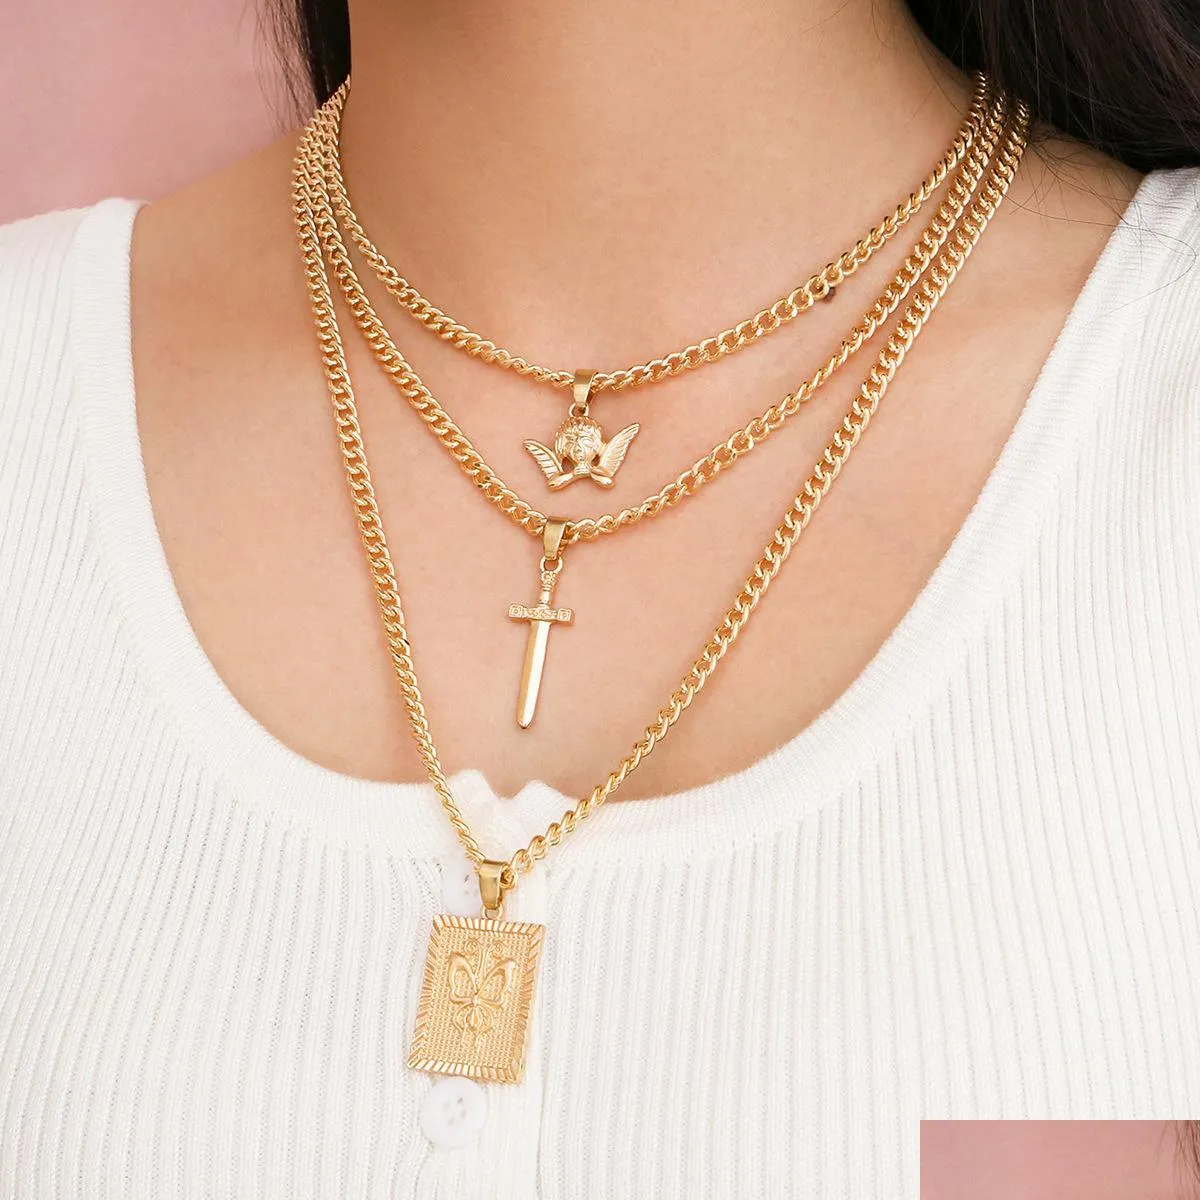 fashion jewelry multilayer necklace metallic butterfly cross pendant necklace 3pcs/set